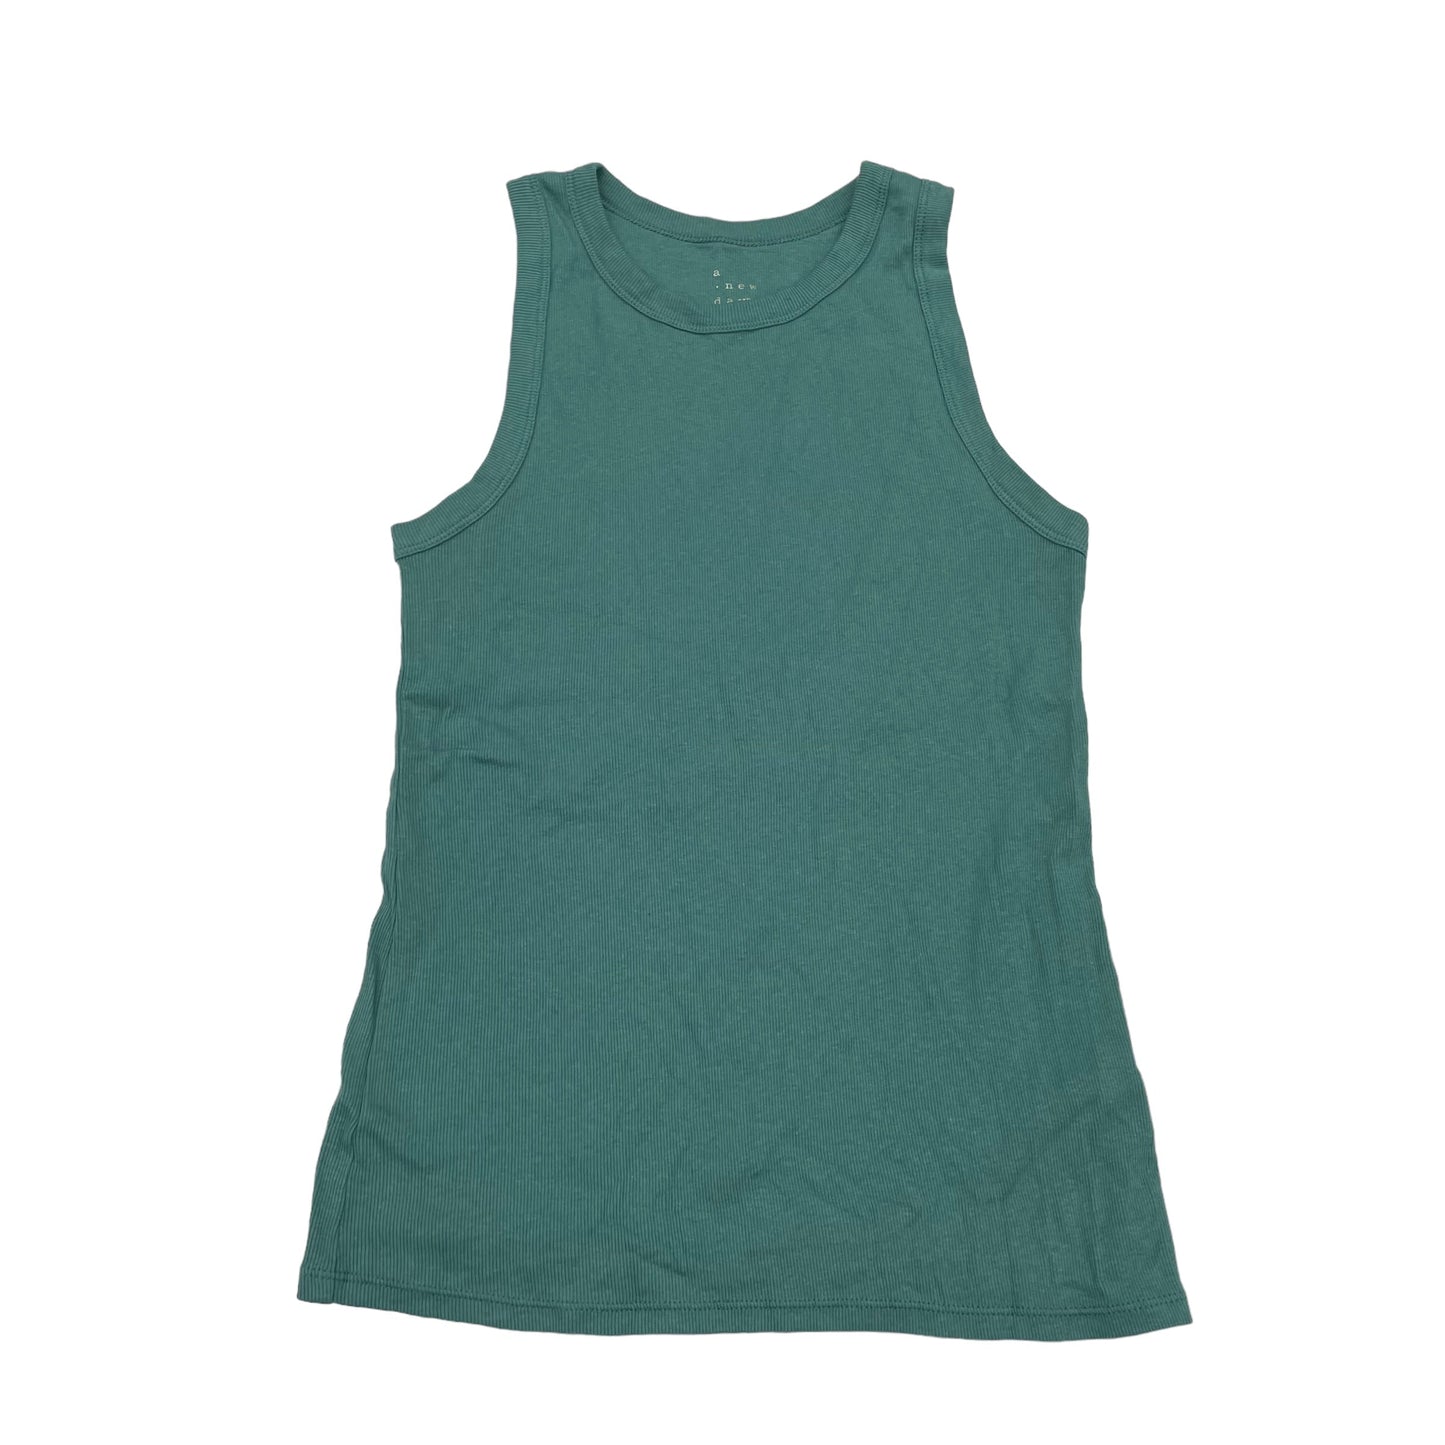 GREEN A NEW DAY TANK TOP, Size L